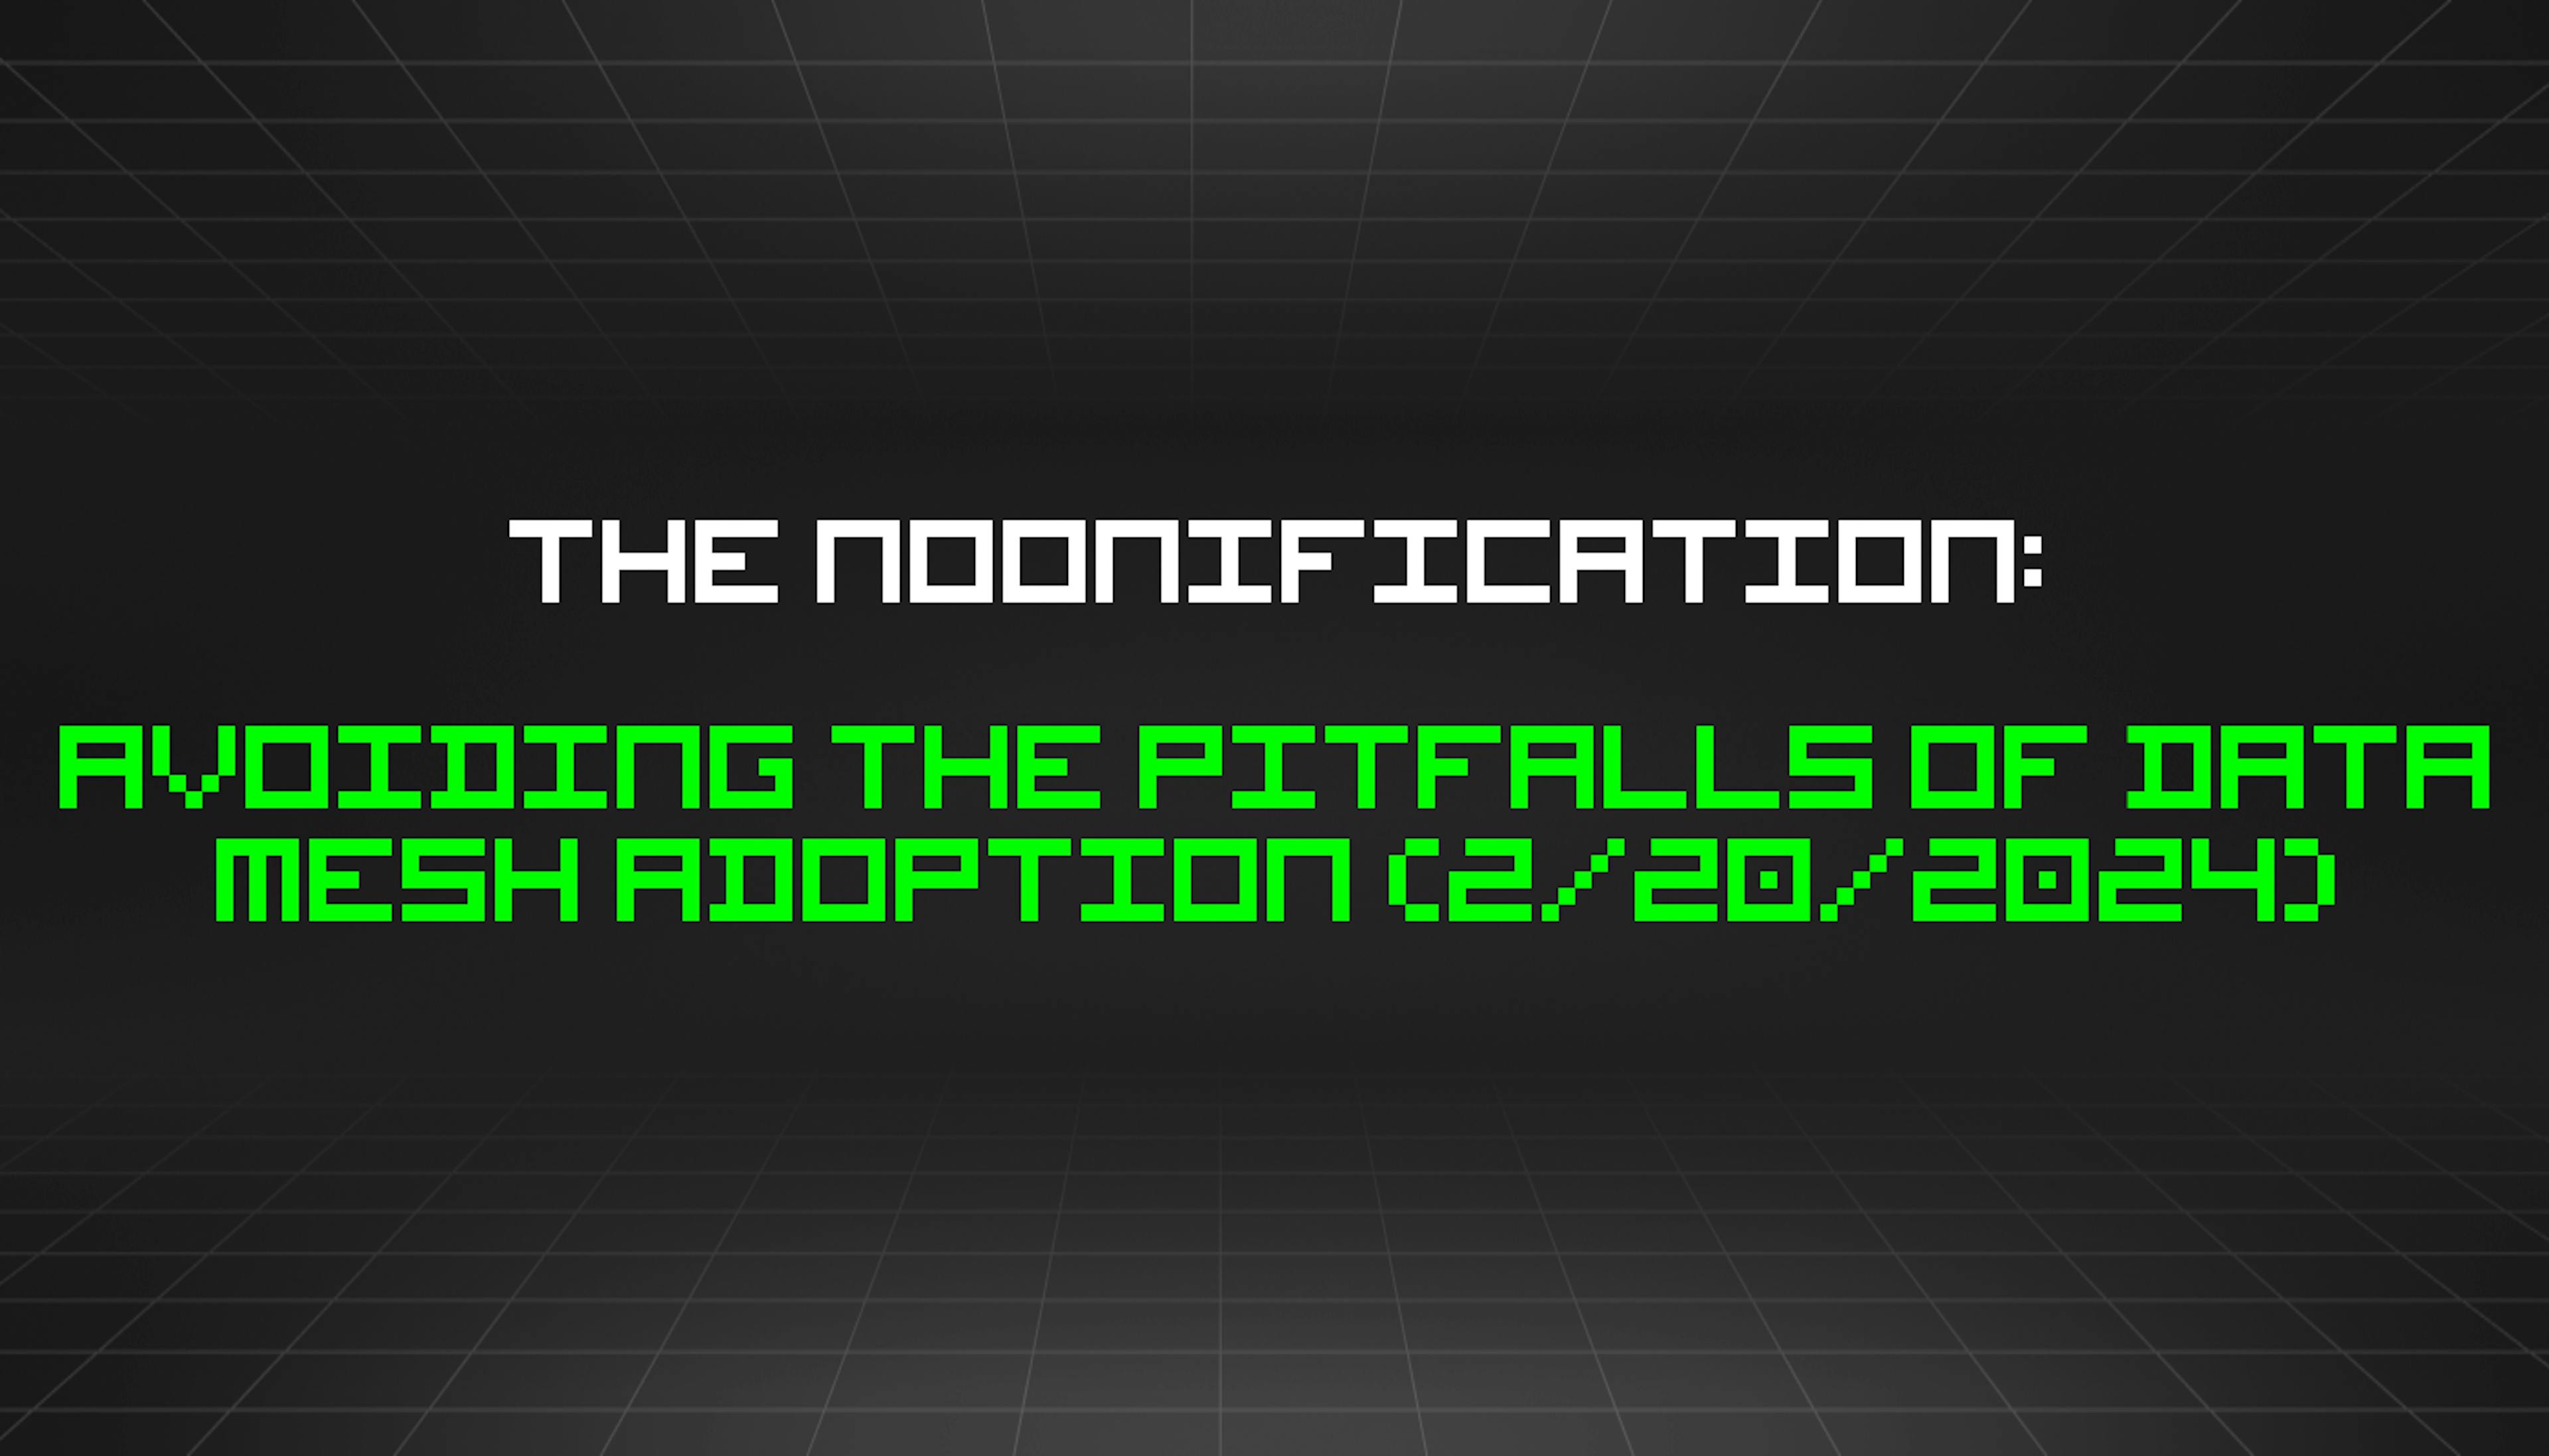 featured image - The Noonification: Avoiding the Pitfalls of Data Mesh Adoption (2/20/2024)